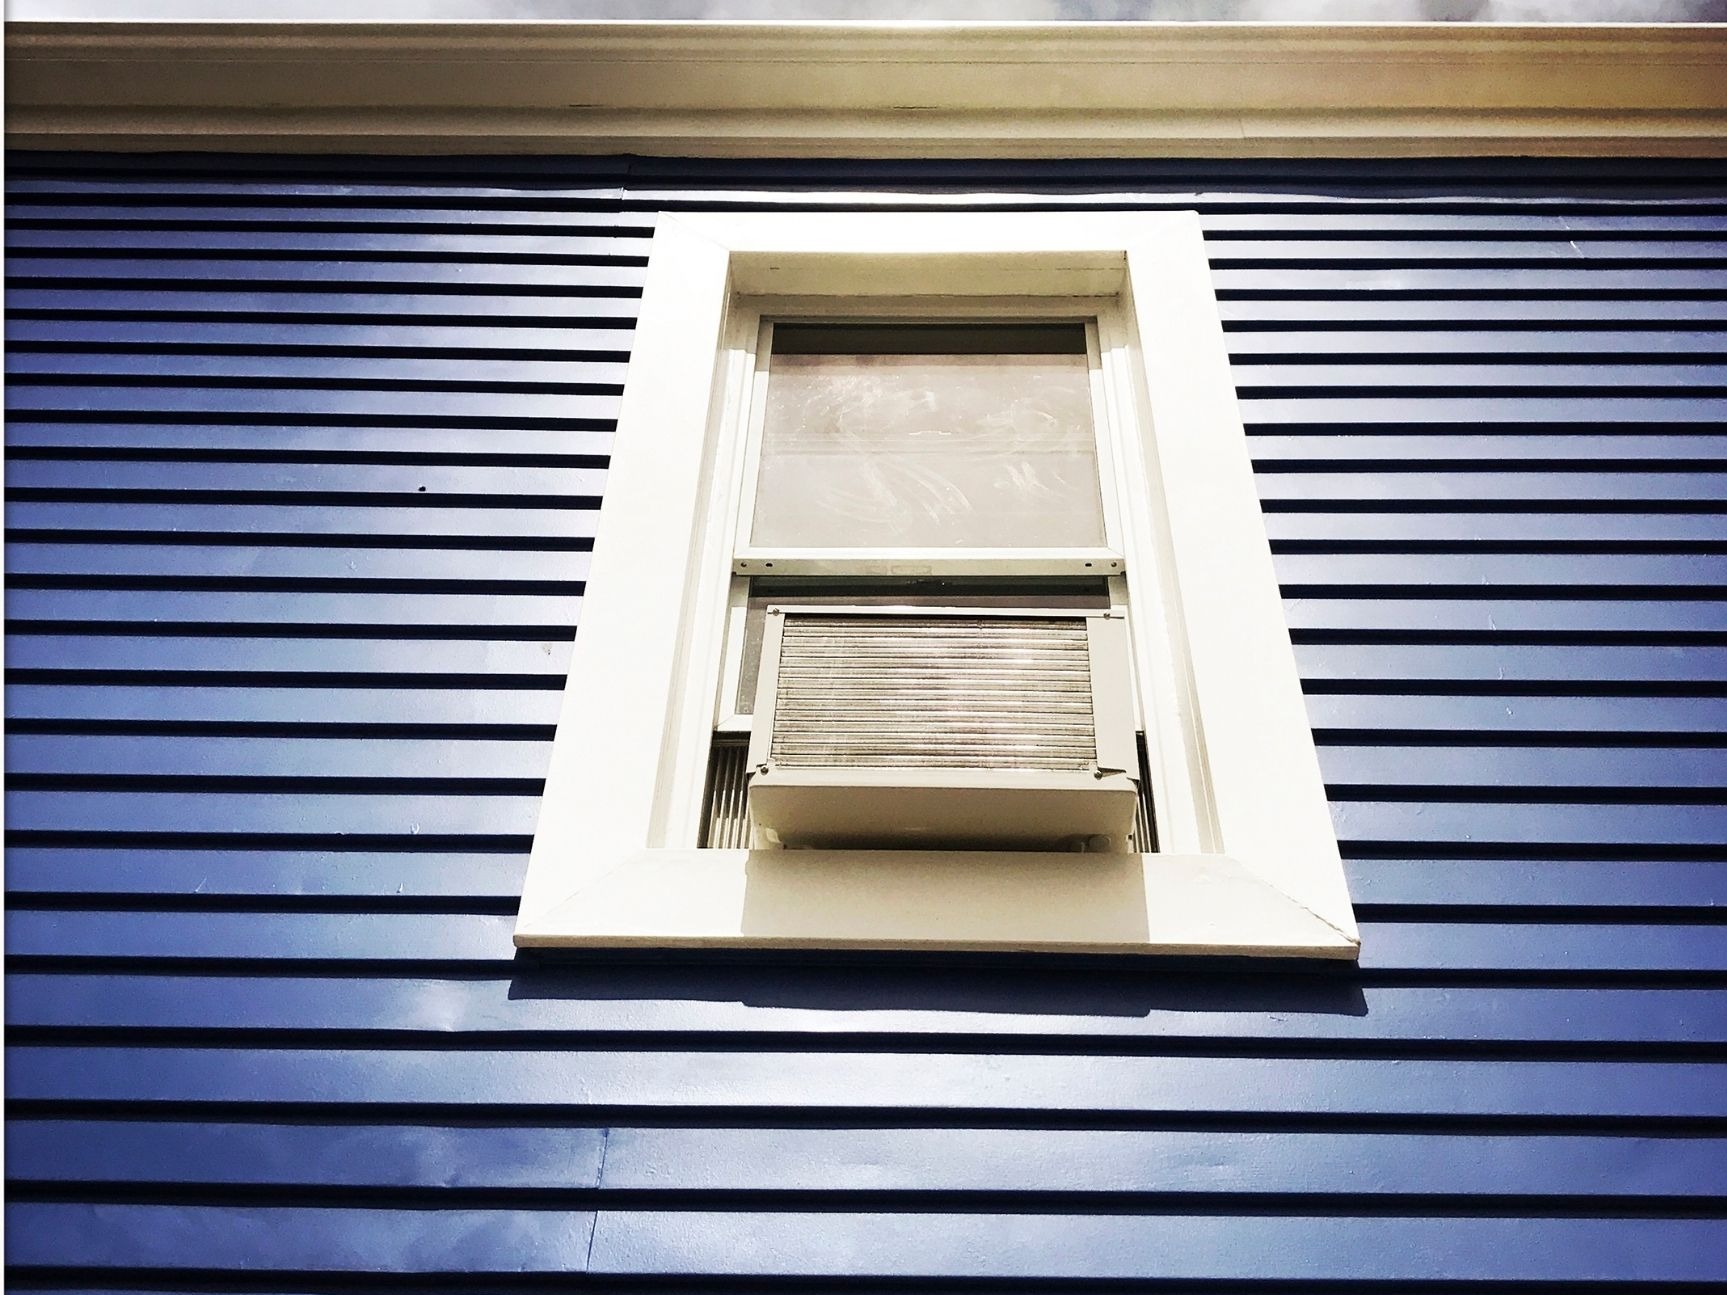 Can You Leave a Window Air Conditioner on 24/7?